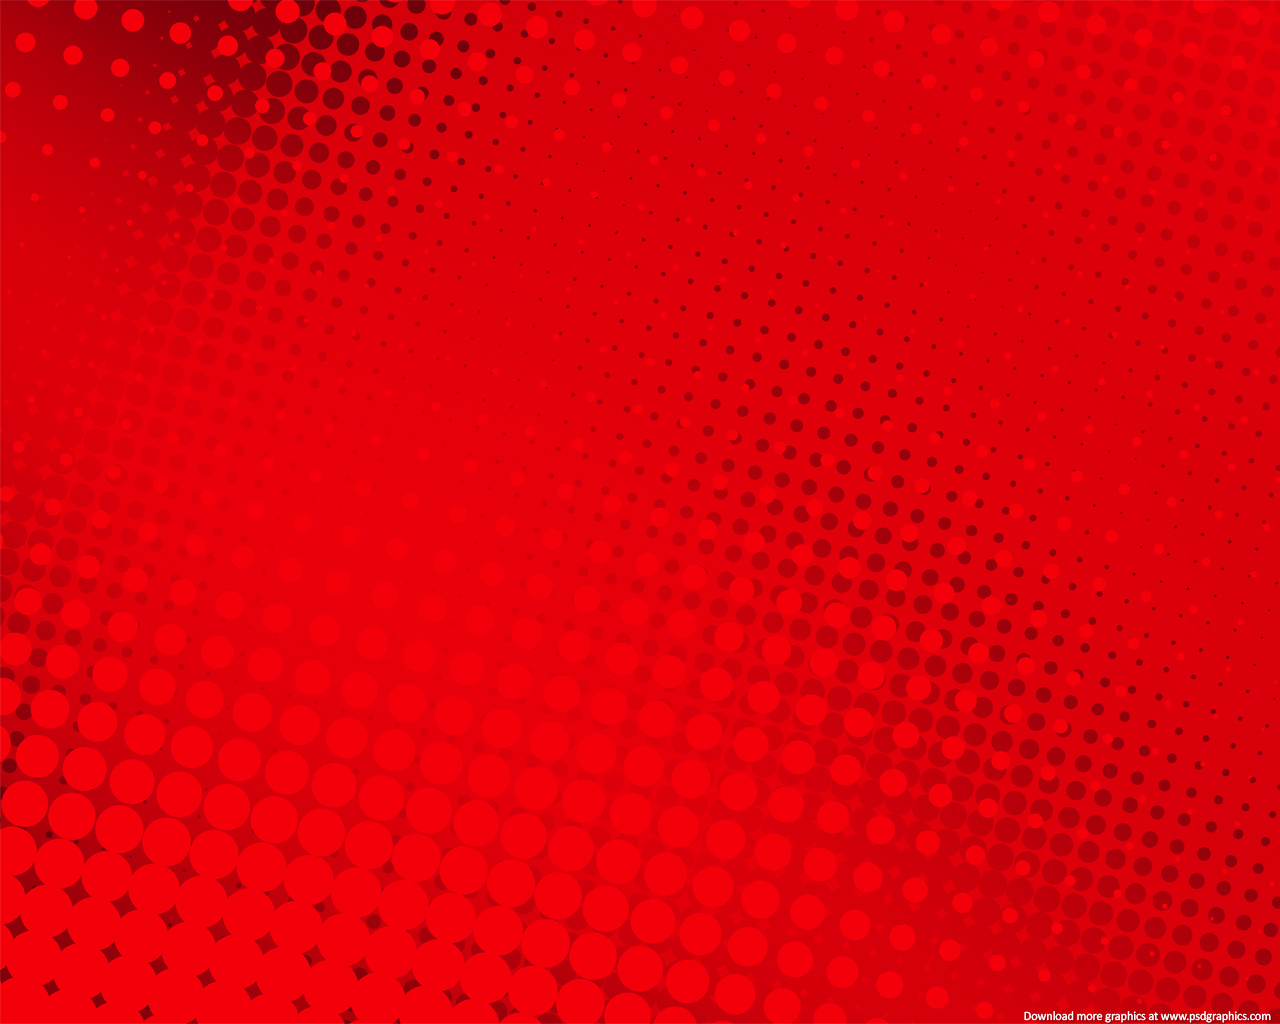 Medium size preview 1280x1024px Red halftone background